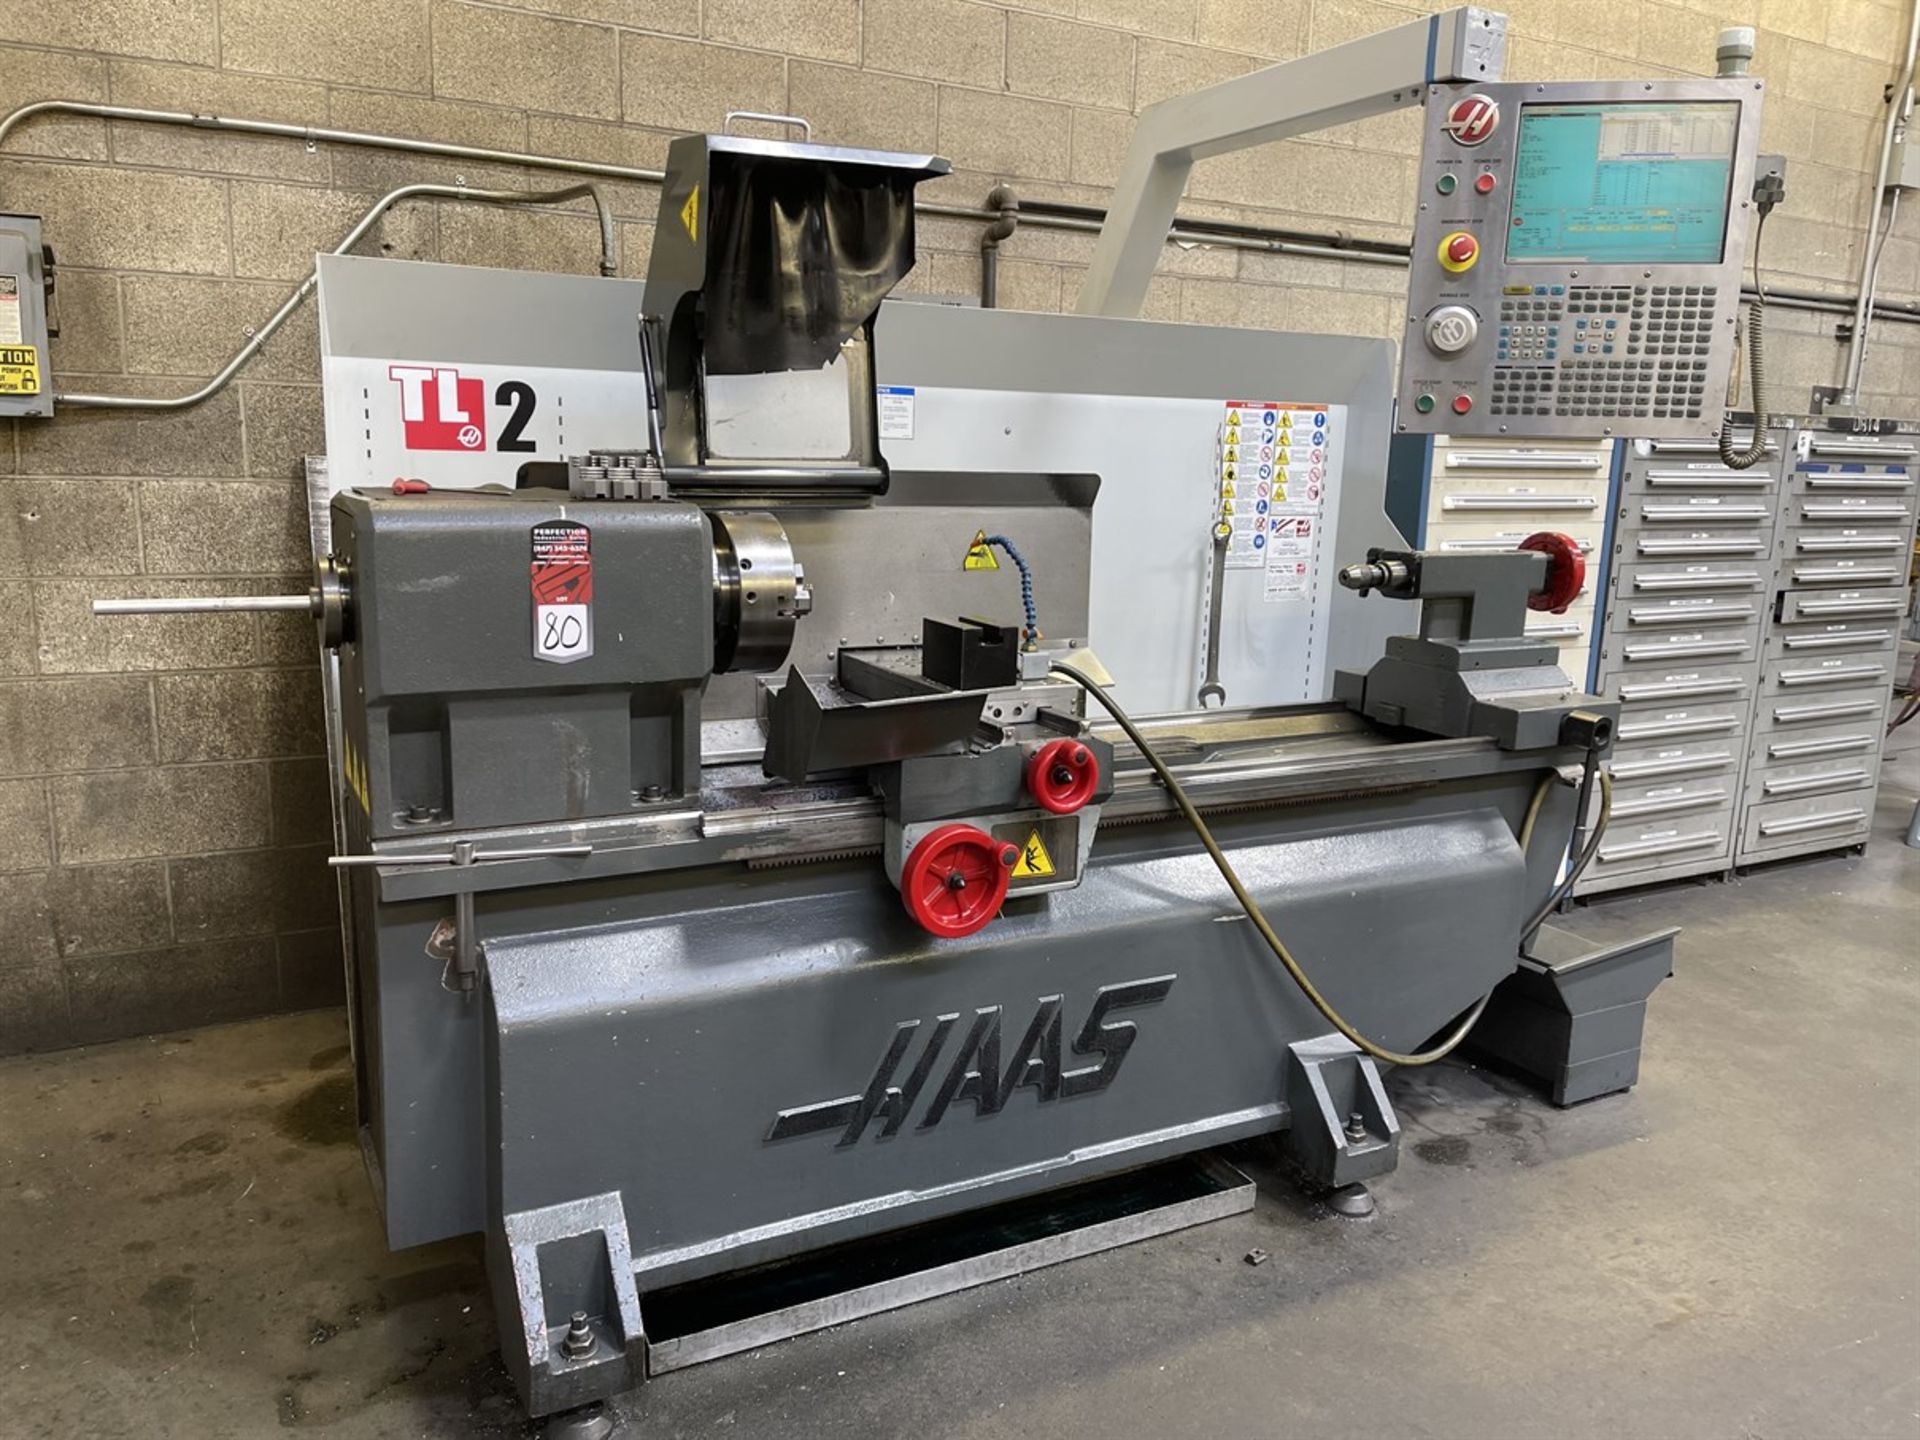 2010 HAAS TL-2 CNC Lathe, s/n 3086501, w/ HAAS Control, 10" 3-Jaw Chuck, 48" Max Turning Length, 16" - Image 3 of 9